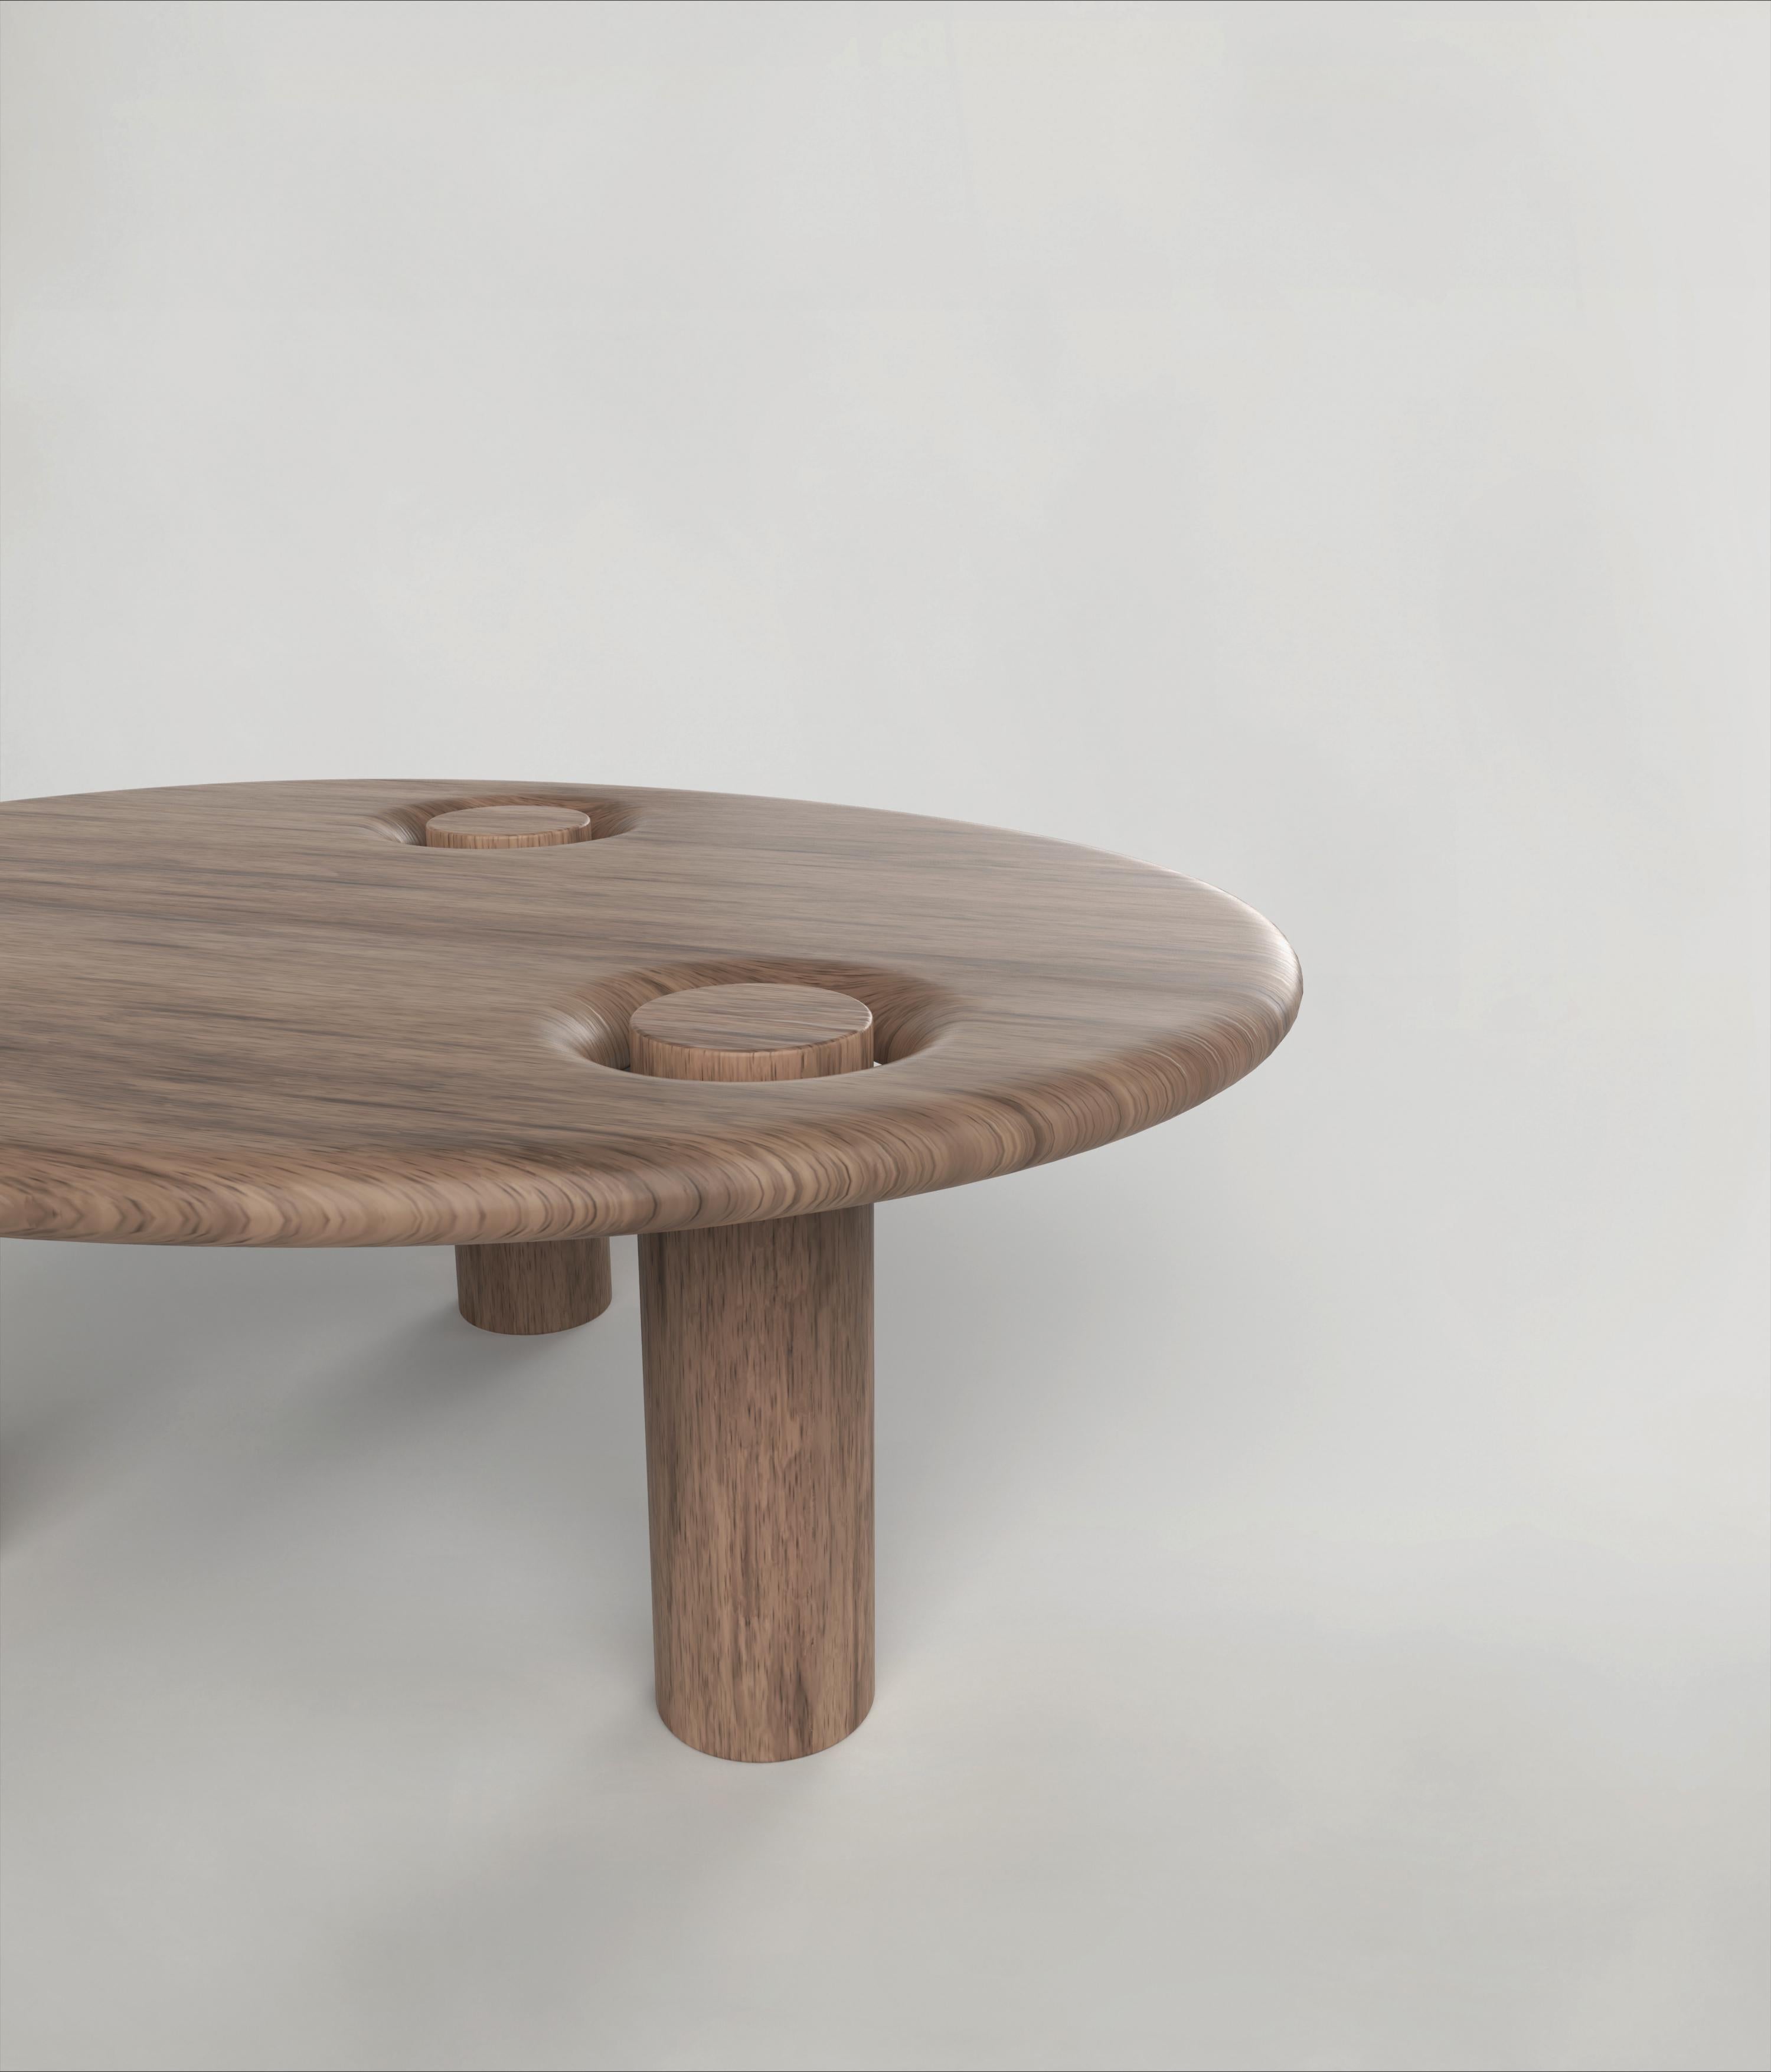 Contemporary LimitedEdition Signed Wood Low Table, Asido V1 by Edizione Limitata For Sale 1